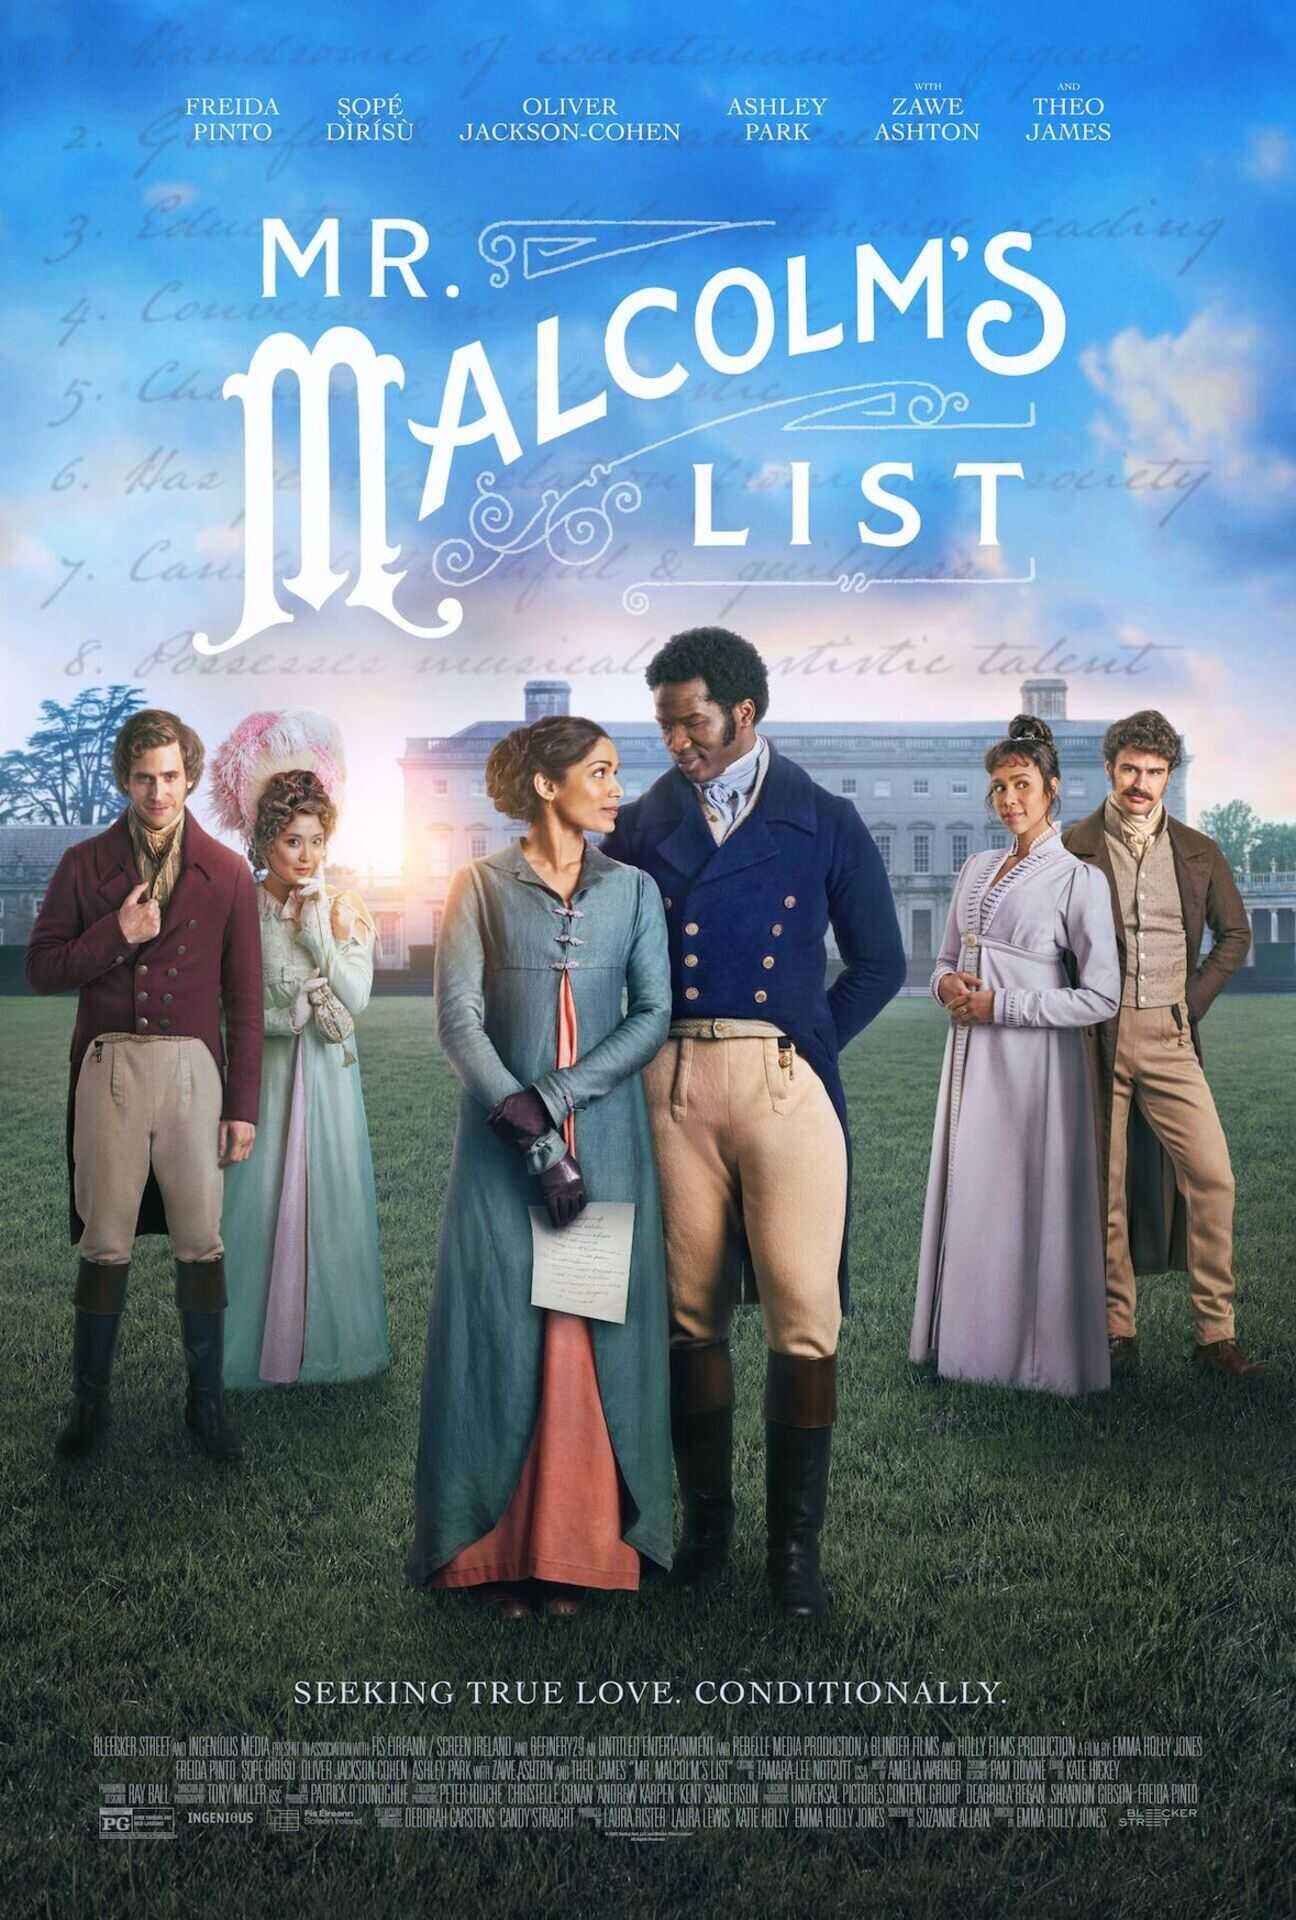 Theatrical poster for Mr. Malcolm's List. Photo courtesy of Bleecker Street.